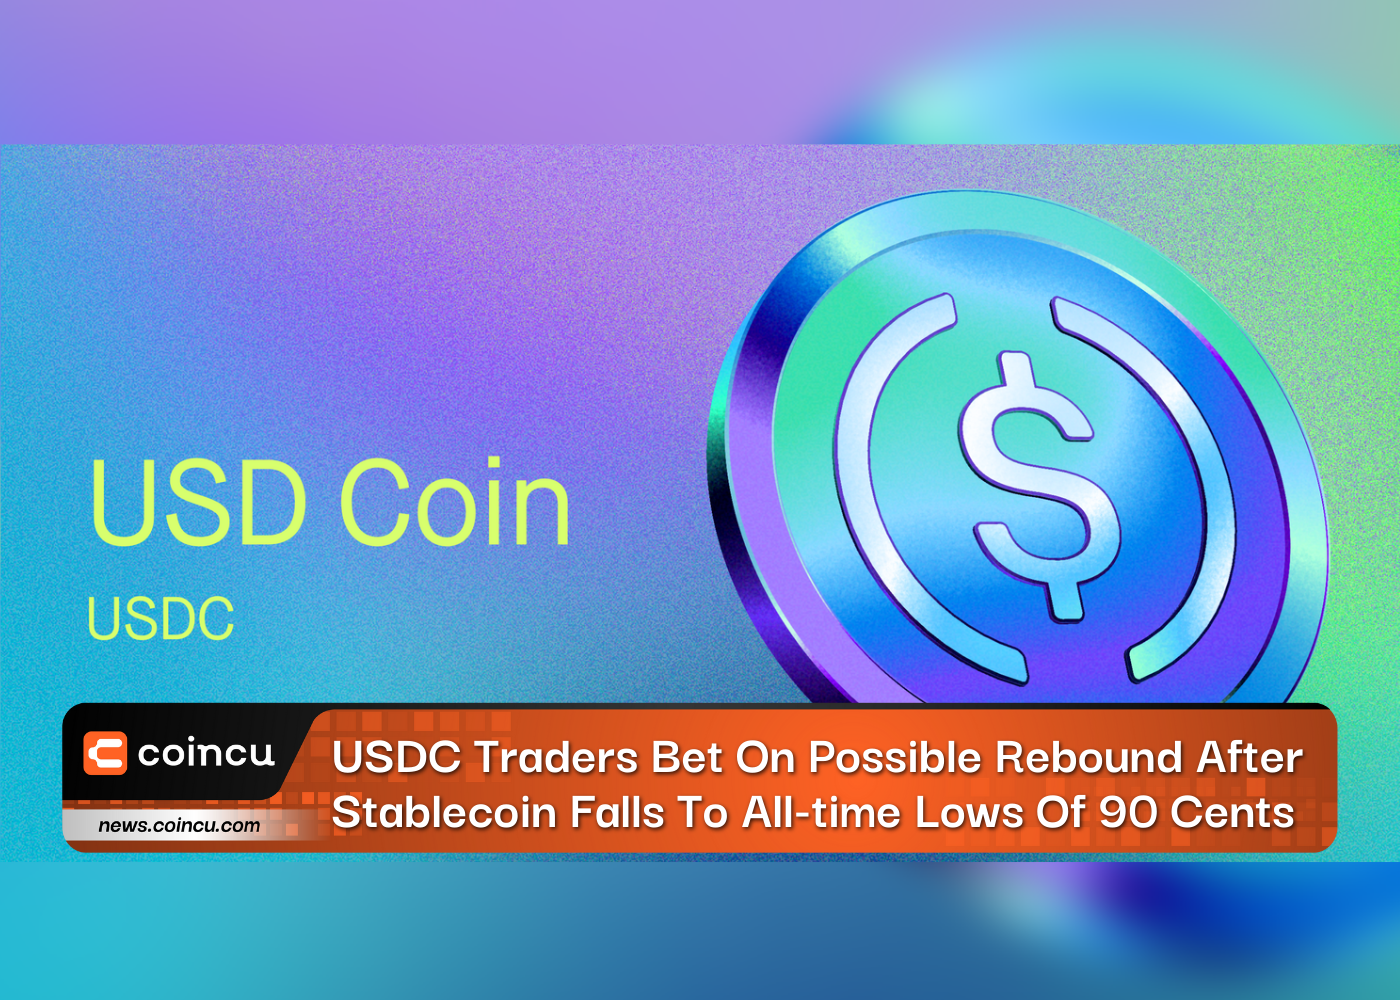 USDC Traders Bet On Possible Rebound After Stablecoin Falls To All-time Lows Of 90 Cents